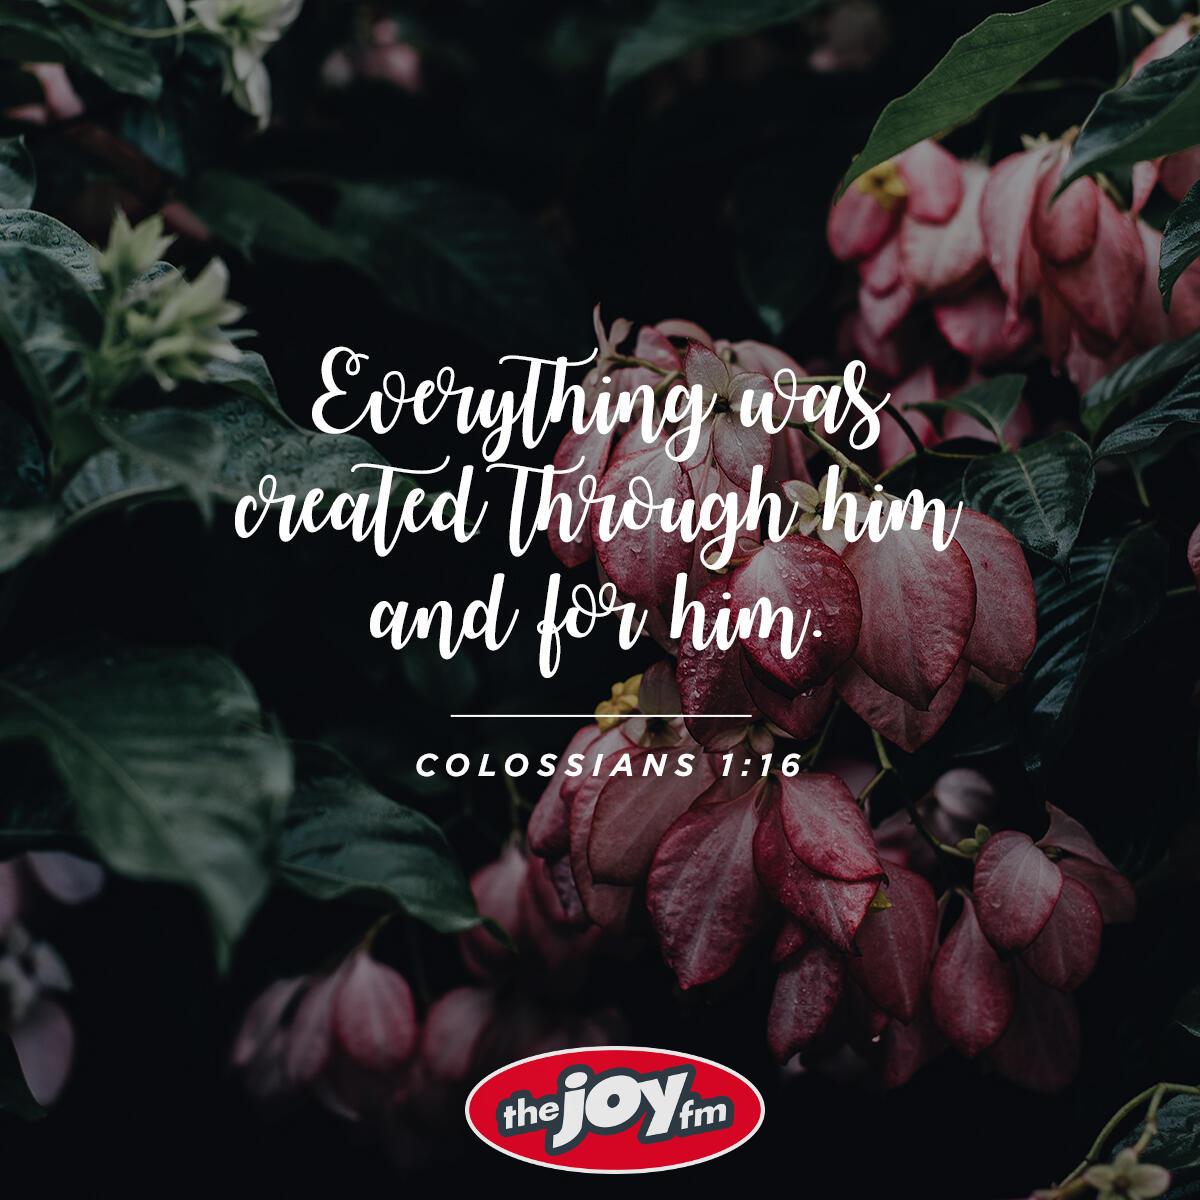 Colossians 1:16 - Verse of the Day